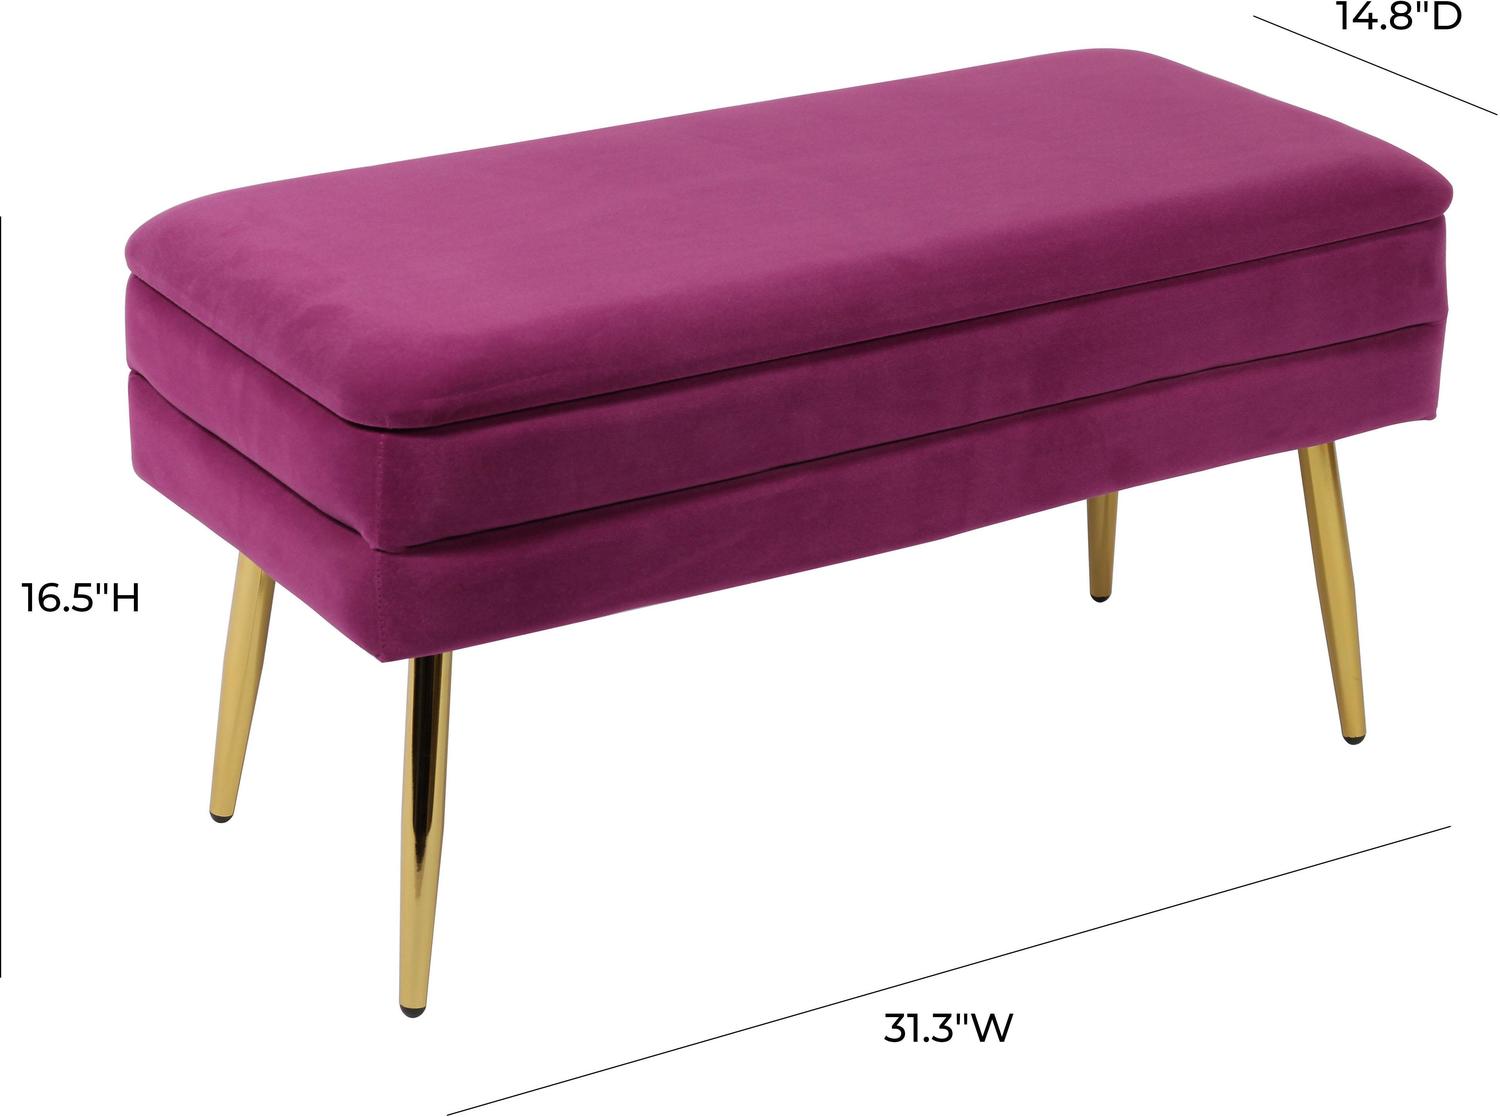 velvet and wood accent chair Contemporary Design Furniture Benches Plum